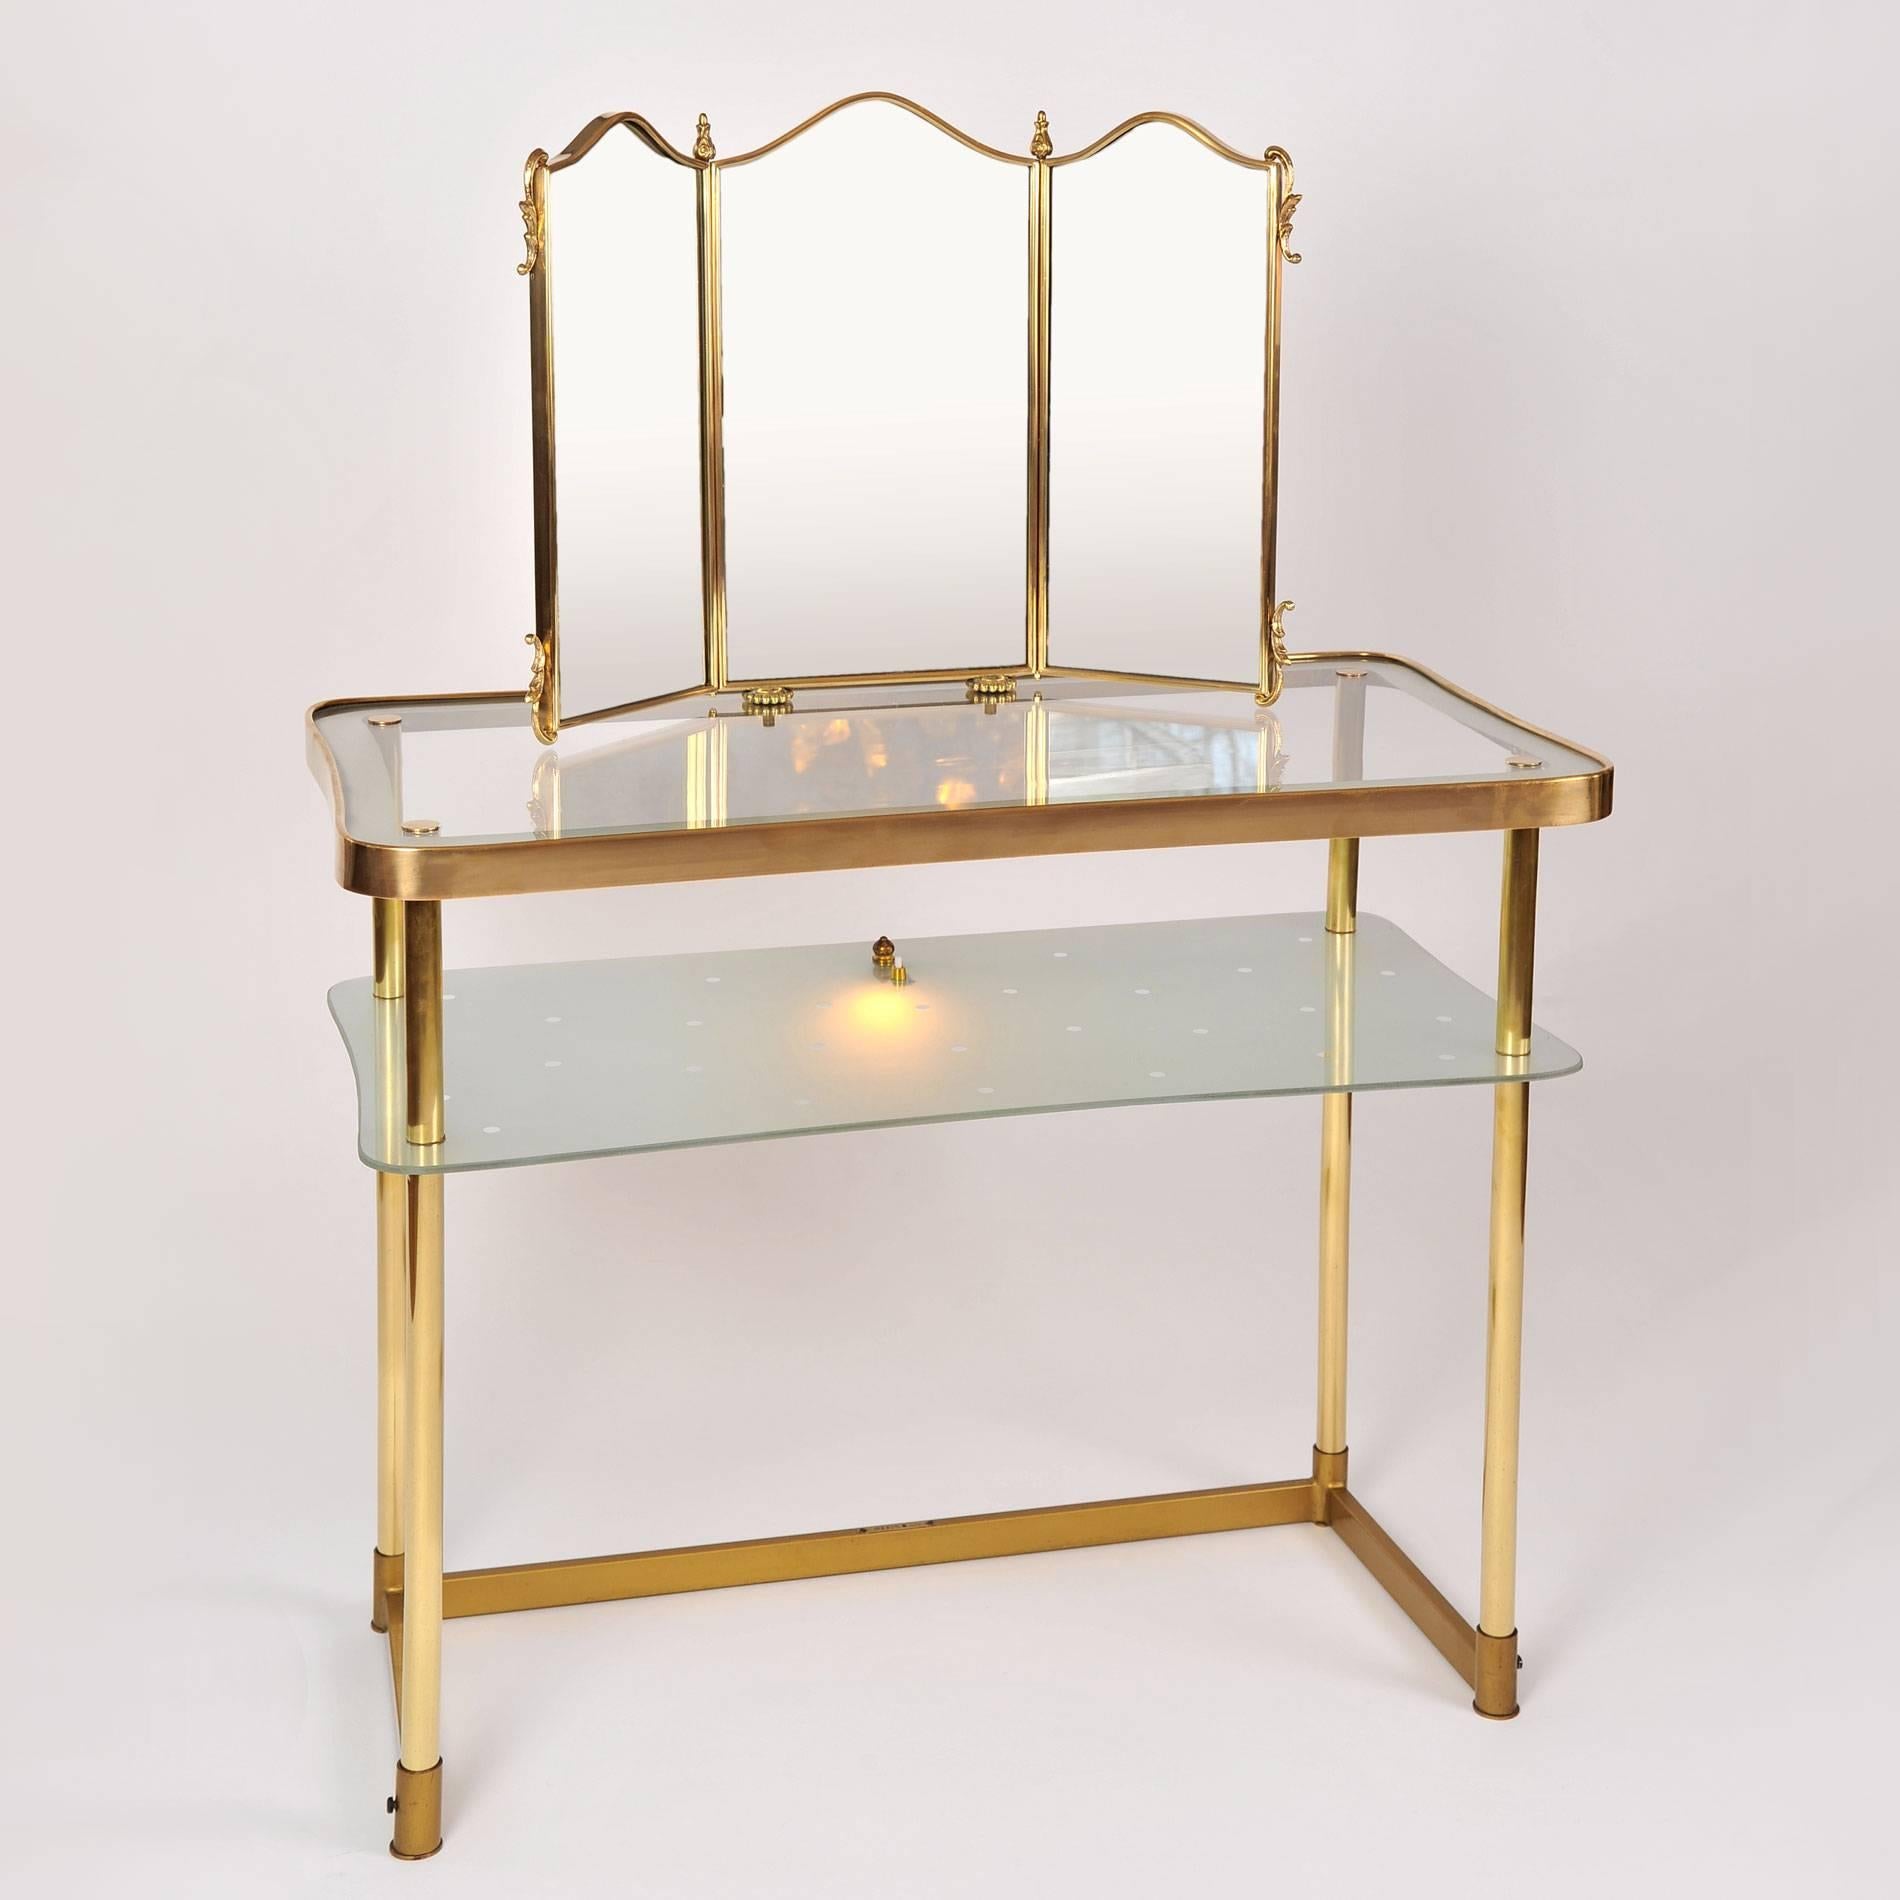 Two-tiered 1950s, vanity in brass with integral triptych mirror. The lower shelf is in etched glass with a polka dot design. A switch operates a fitted light, all on a rectangular base.